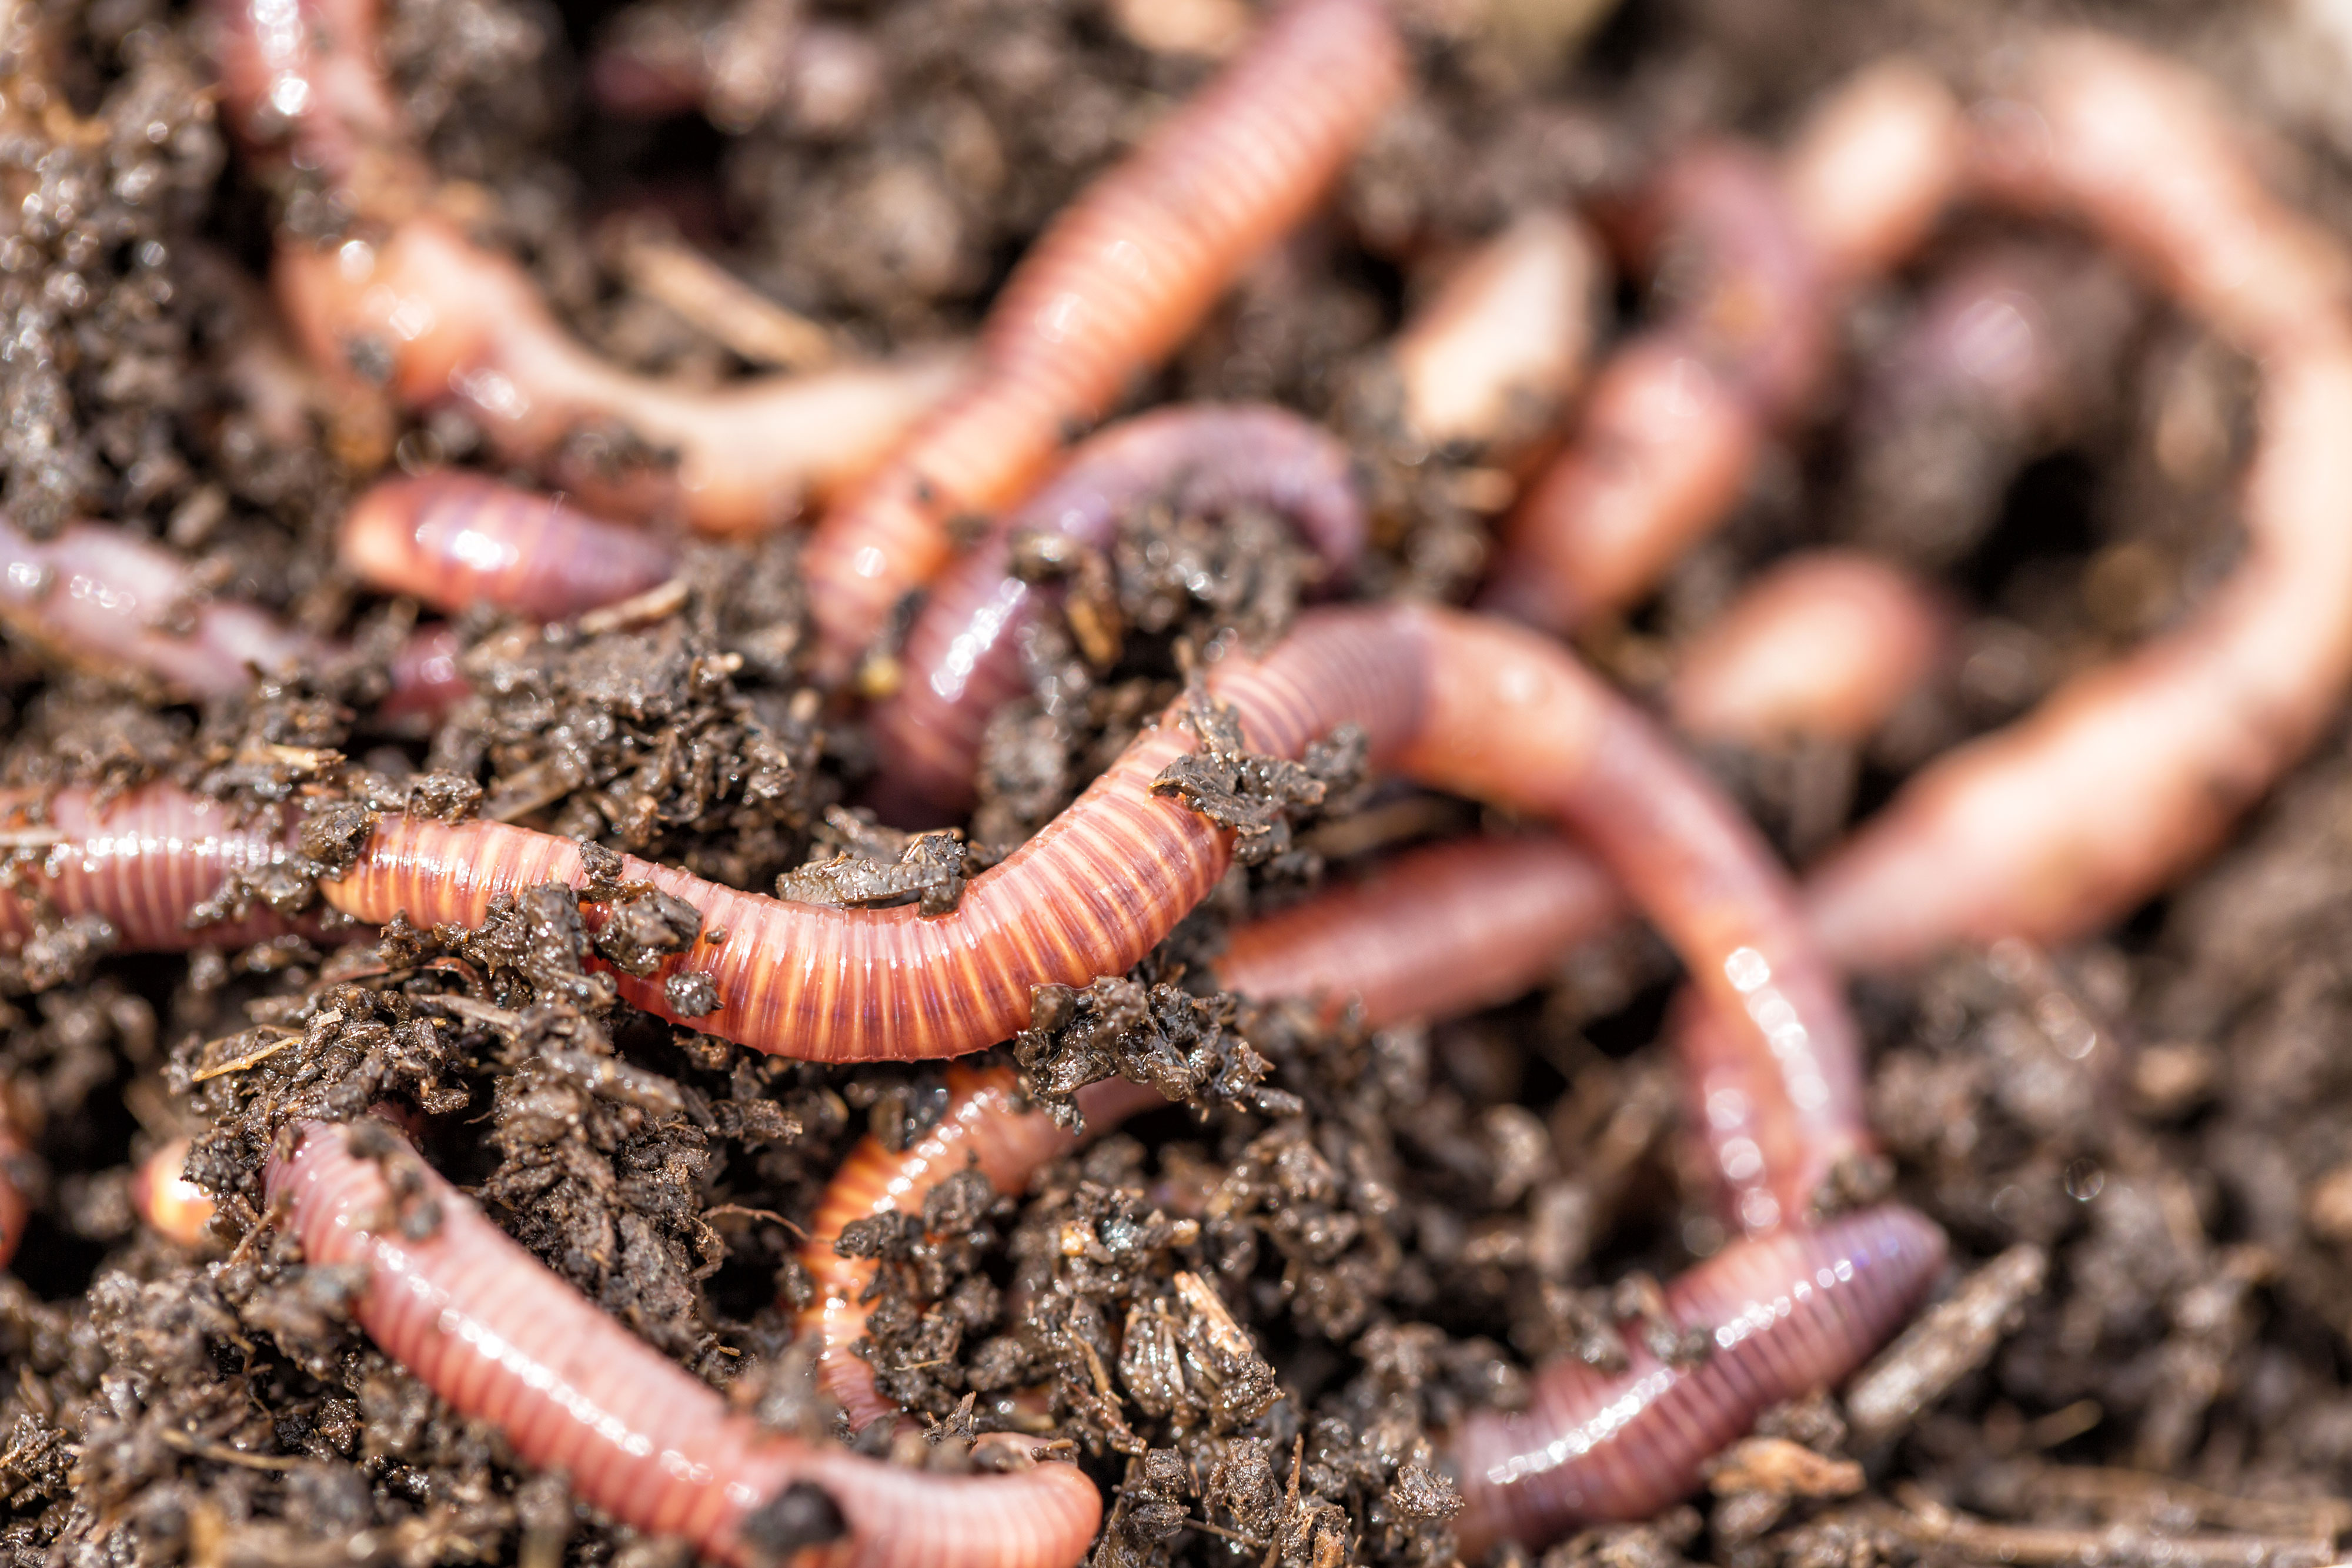 Worms in dirt.